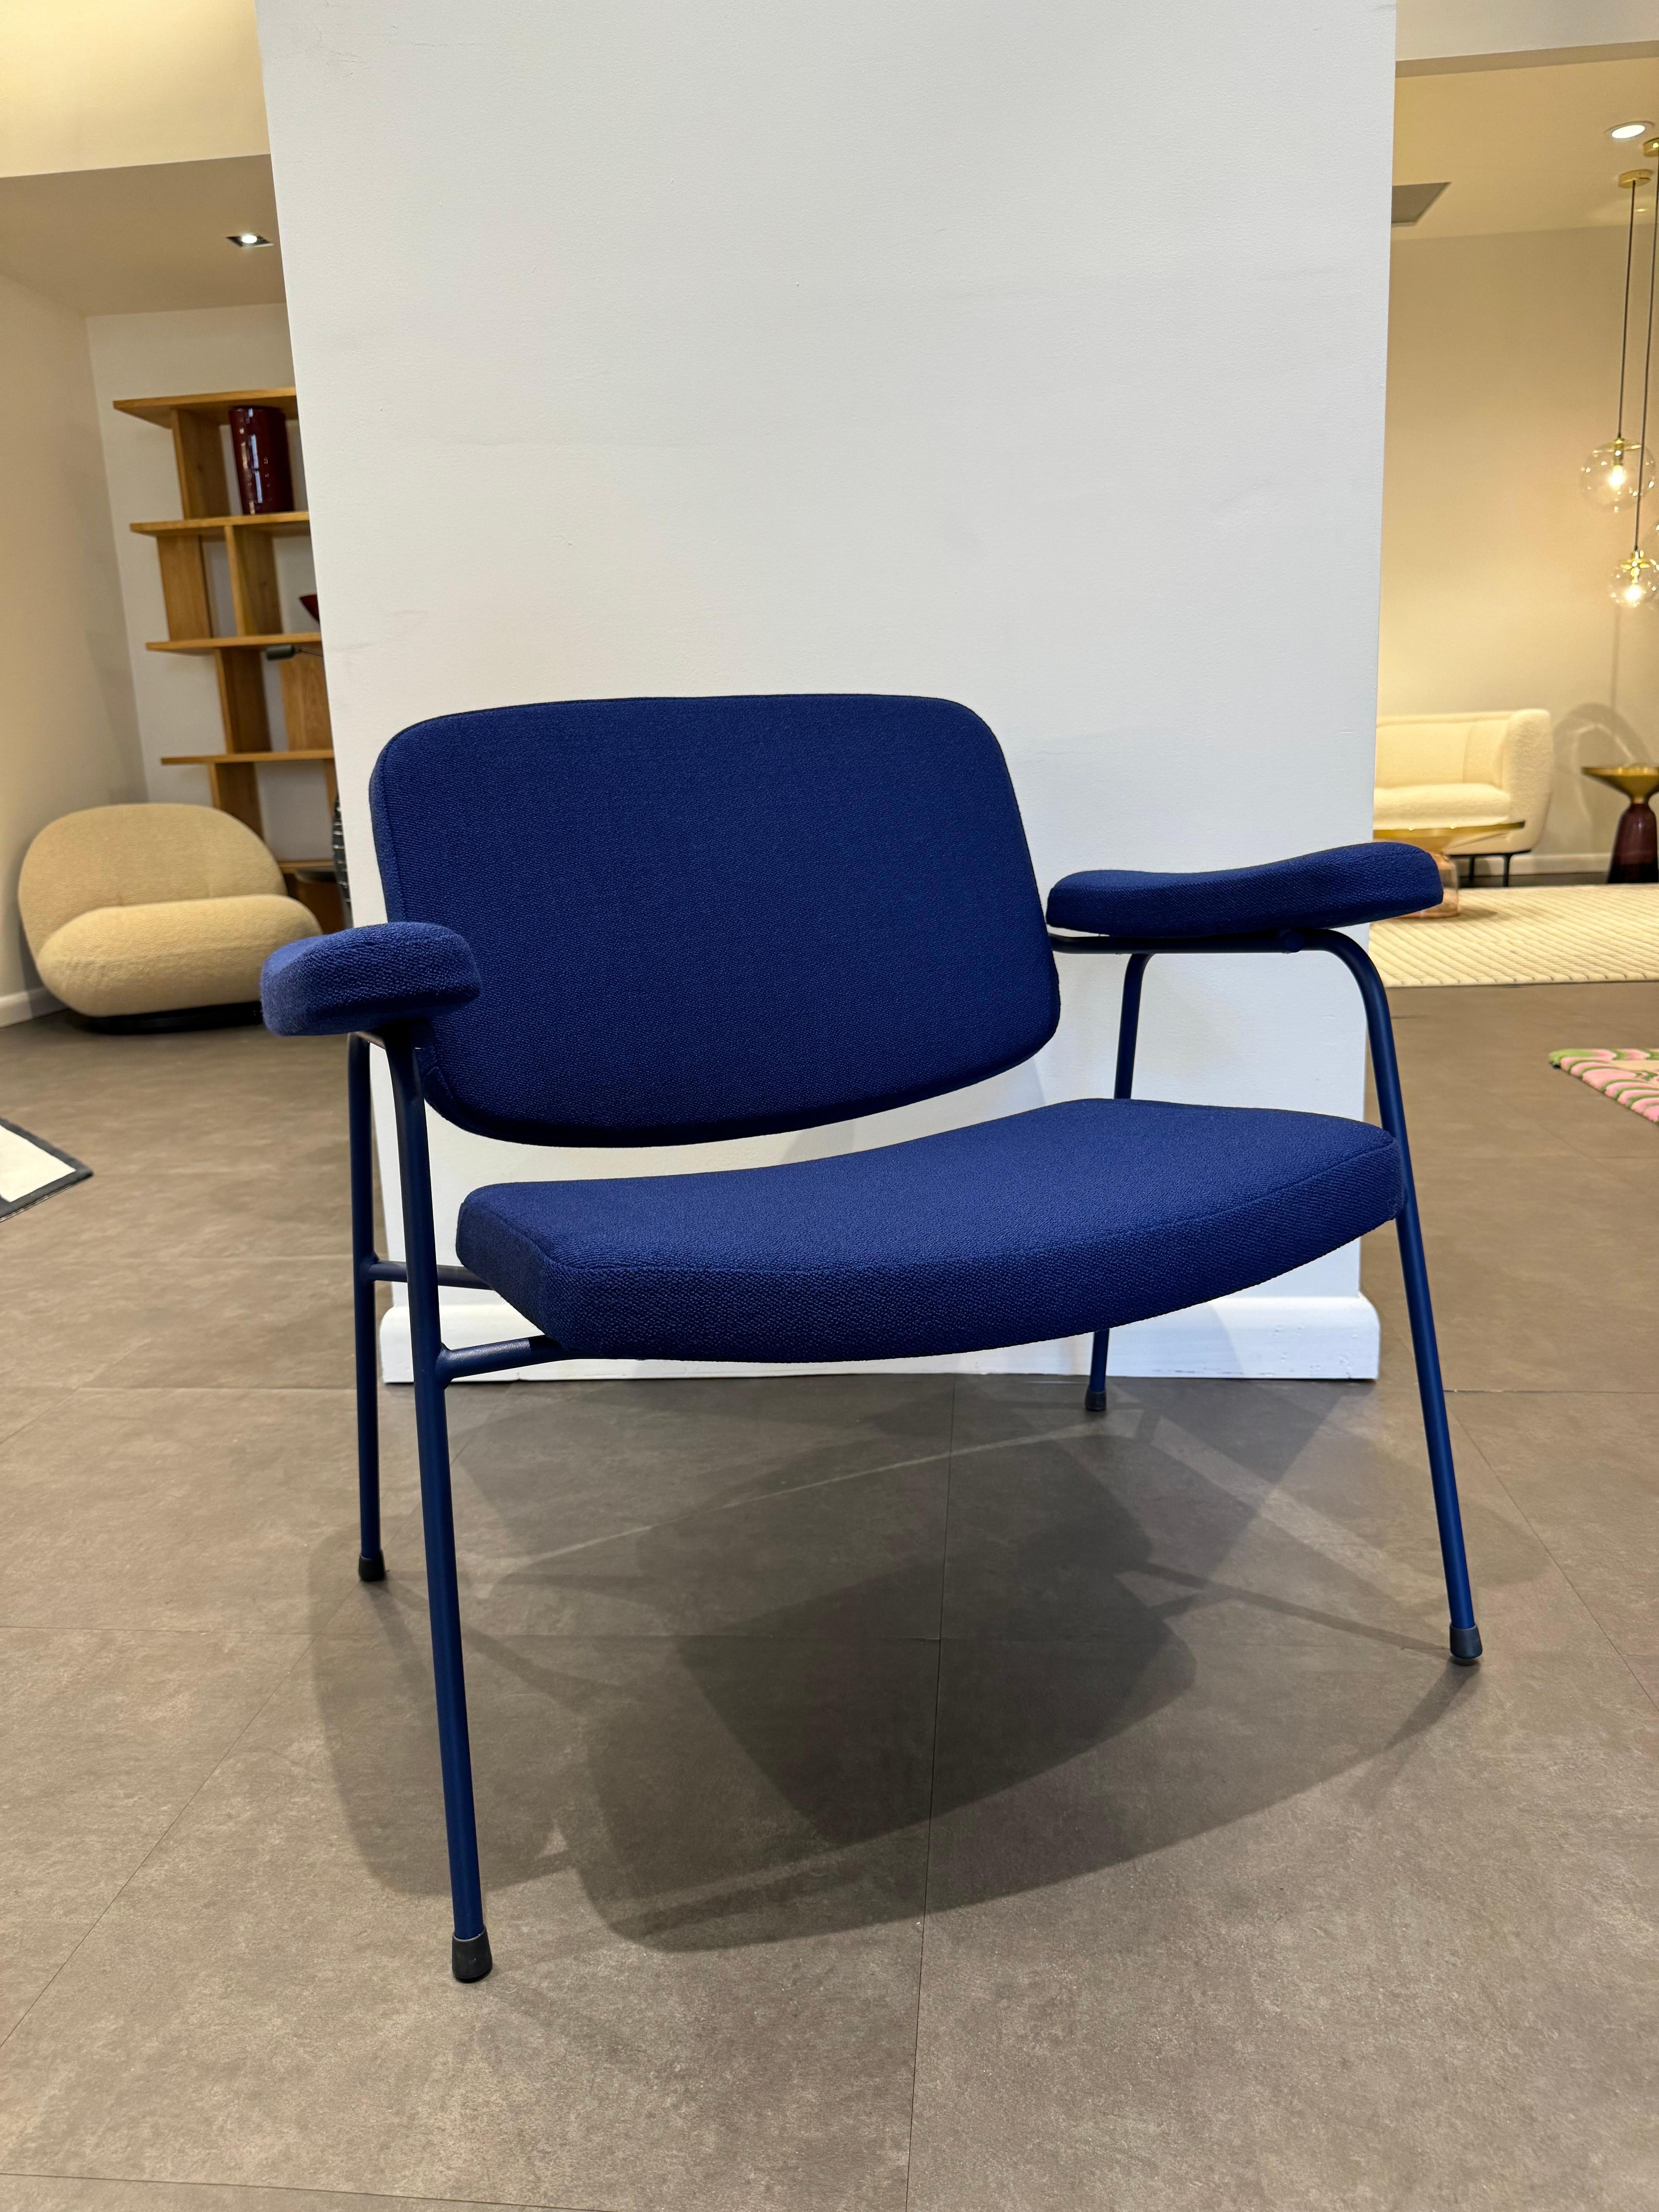 Upholstery Fabric not standard(name
fabric/colour/supplier) Vidar by
Kvadrat color 0772 (GG)

Moulin Lounge
Design by Pierre Paulin
The 1958 Moulin chair family were some of Paulin's first commercial pieces exploring Mid-Century Modern aesthetics.